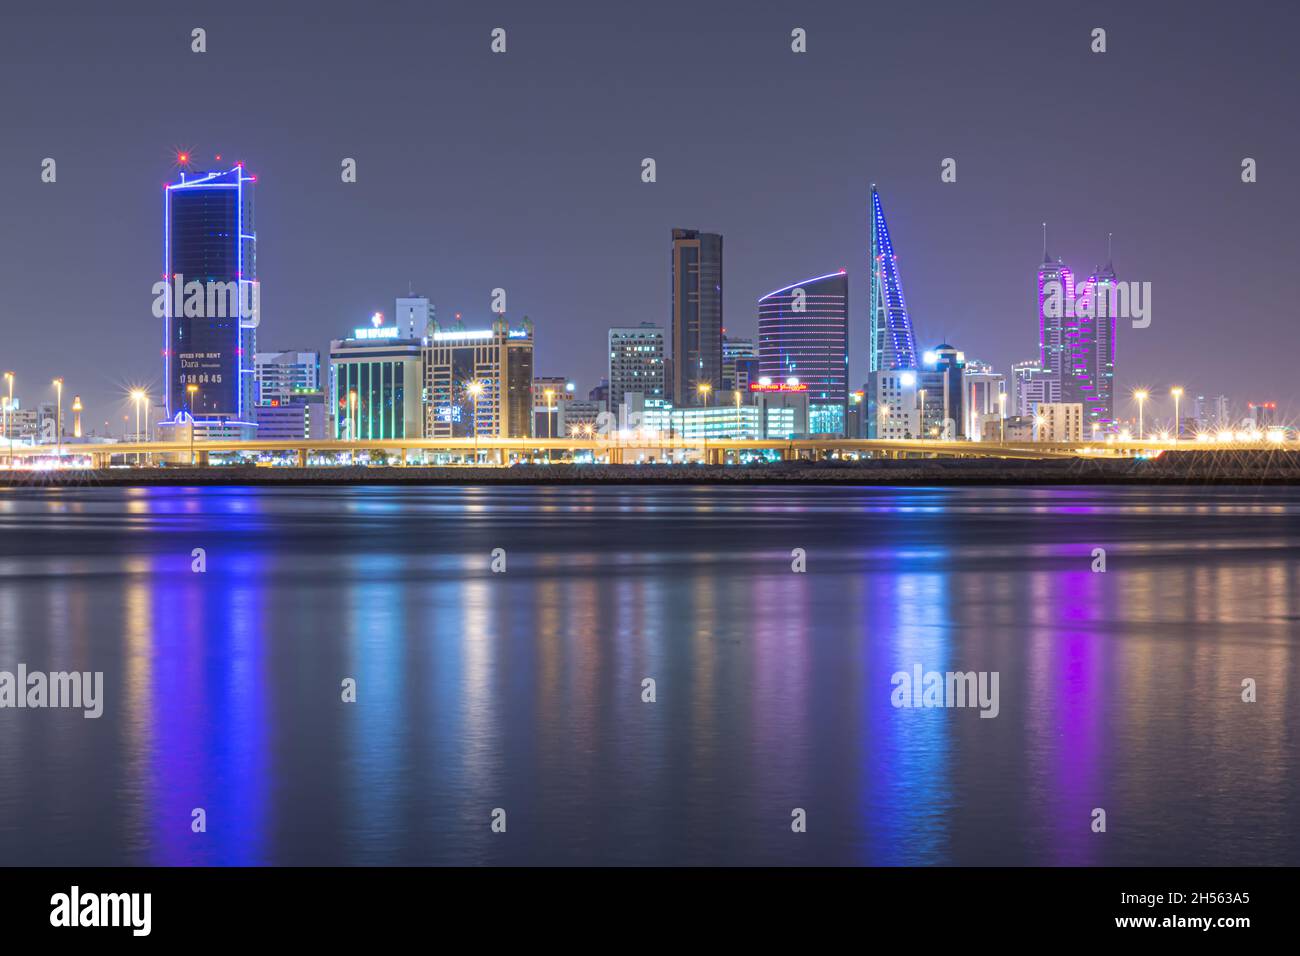 Night modern city skyline with neon lights and reflection in the water. Manama, the Capital of Bahrain, Middle East Stock Photo